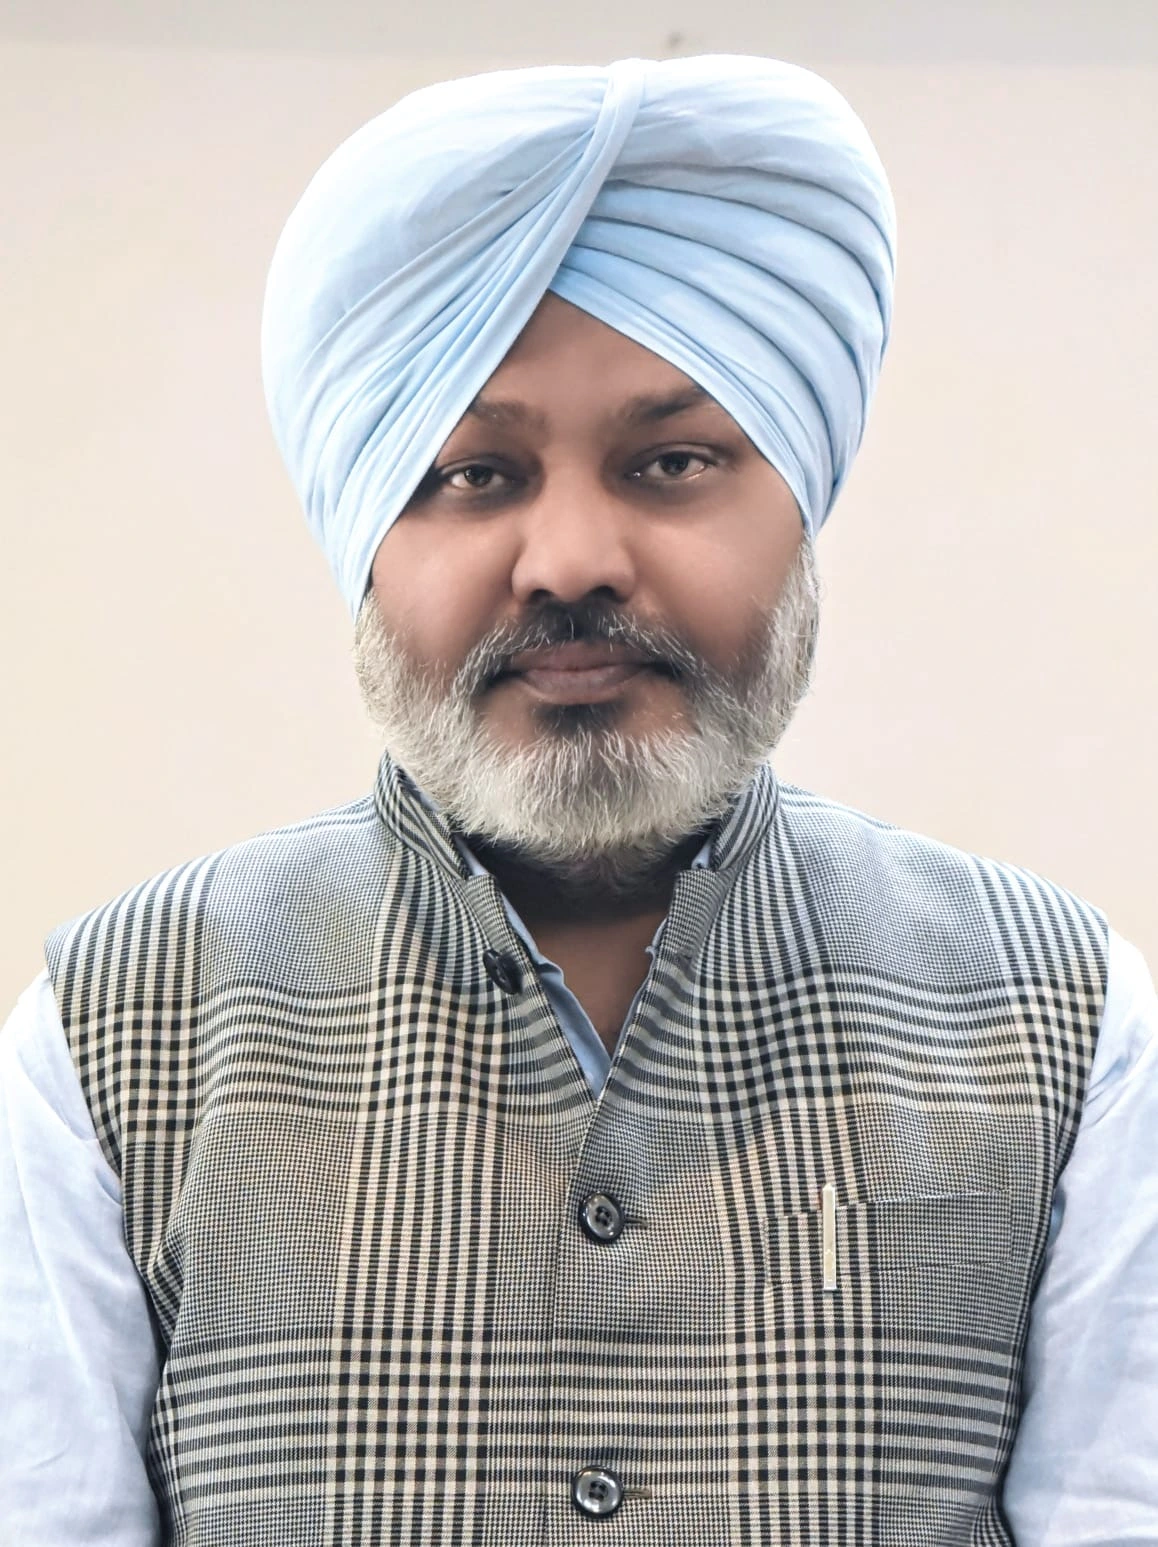 *Punjab’s revenue from GST, Excise and VAT crosses 30K Crore in 10 months of FY 2023-24: Harpal Singh Cheema